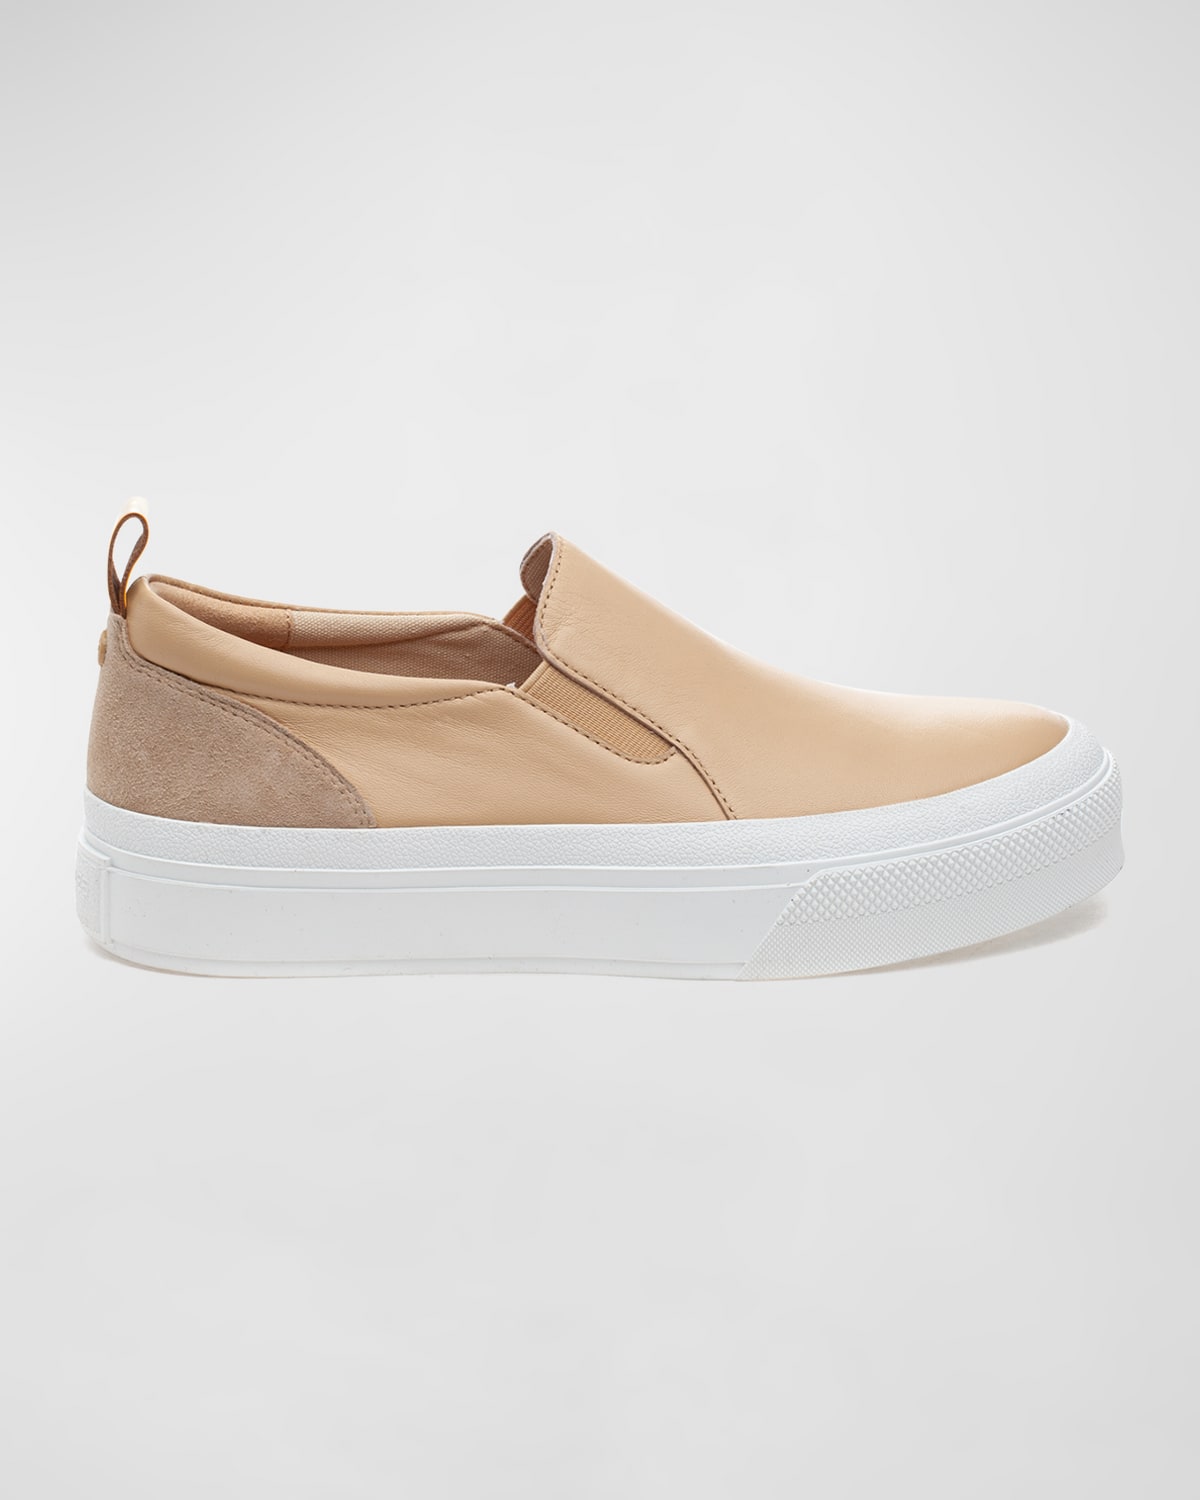 Jslides Gia Mixed Leather Slip-on Style In Lt Sand